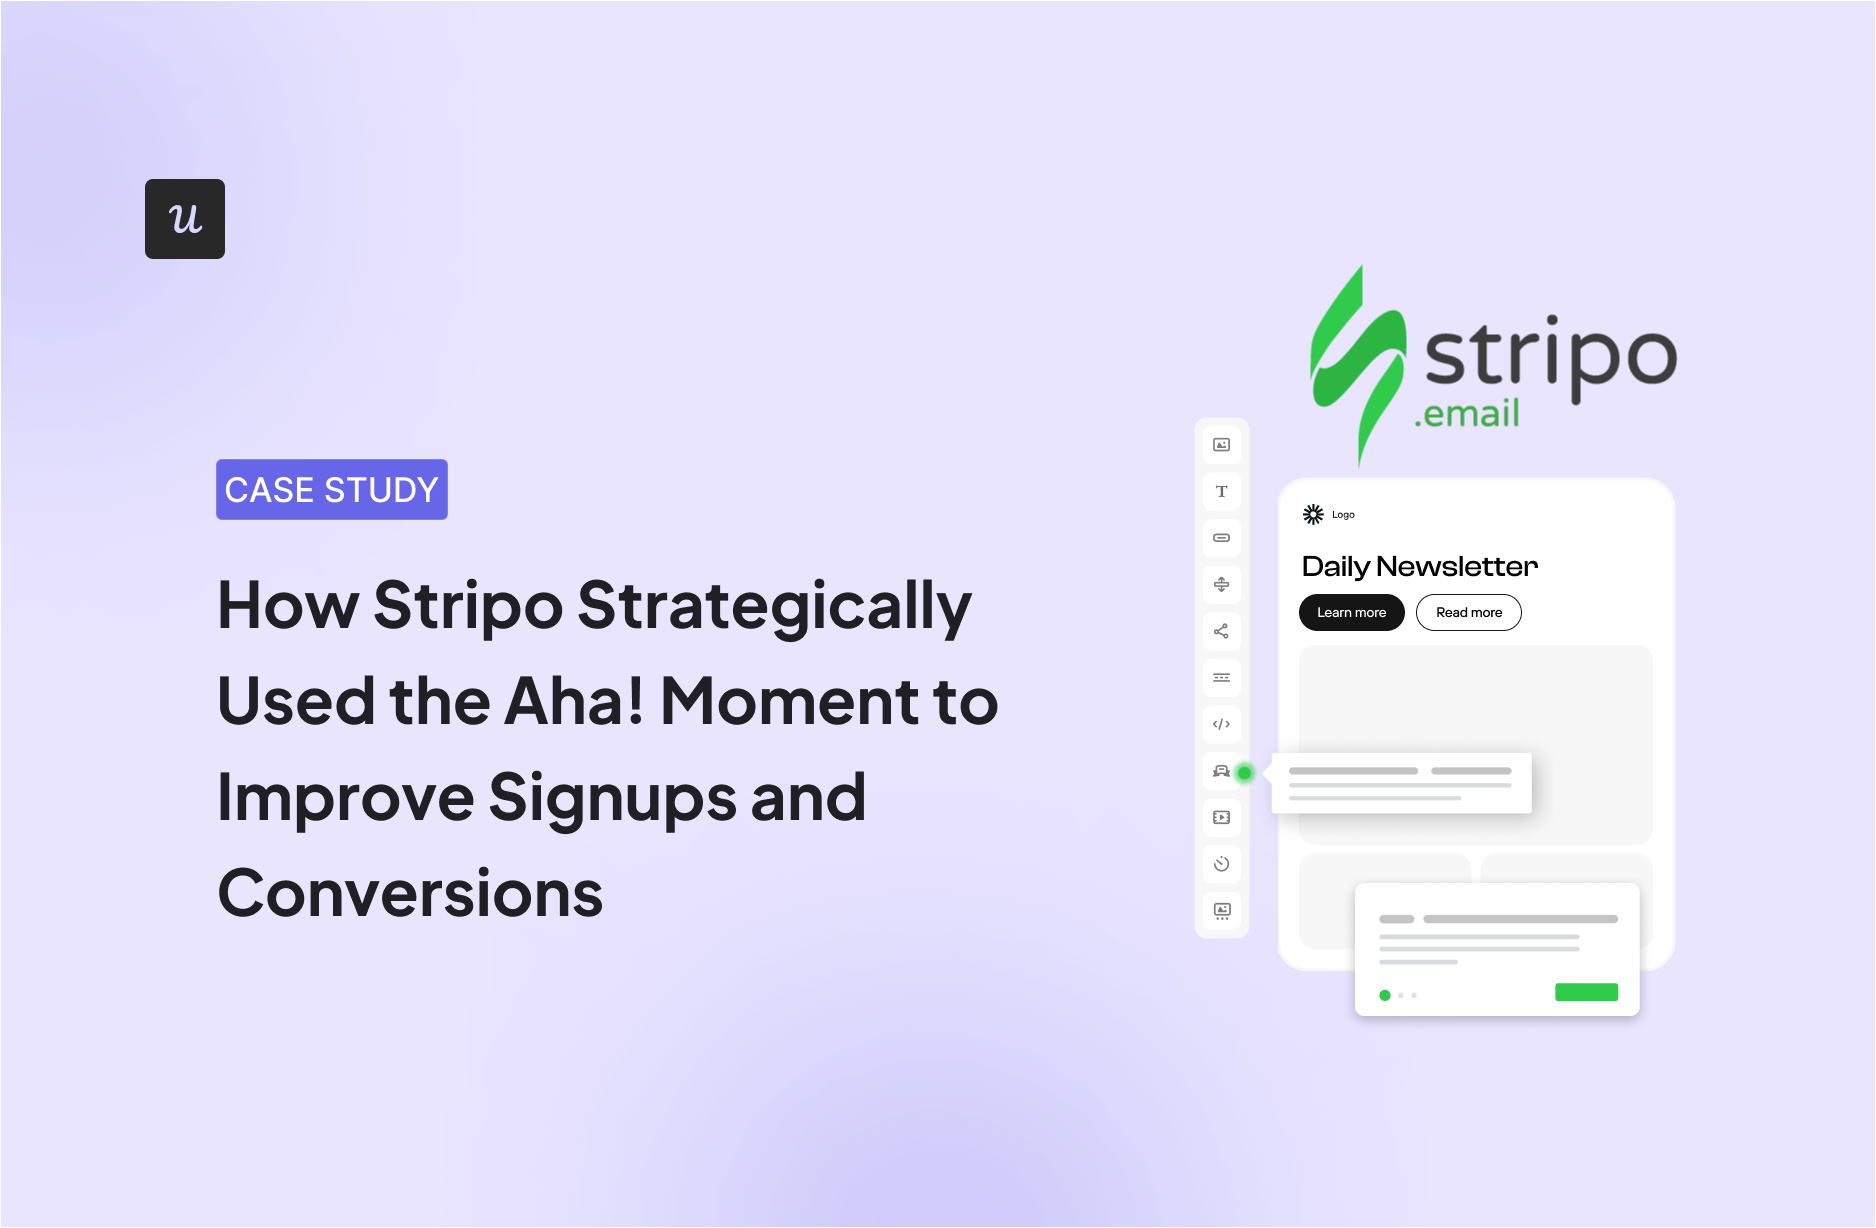 How Stripo Strategically Used the Aha! Moment to Improve Signups and Conversions